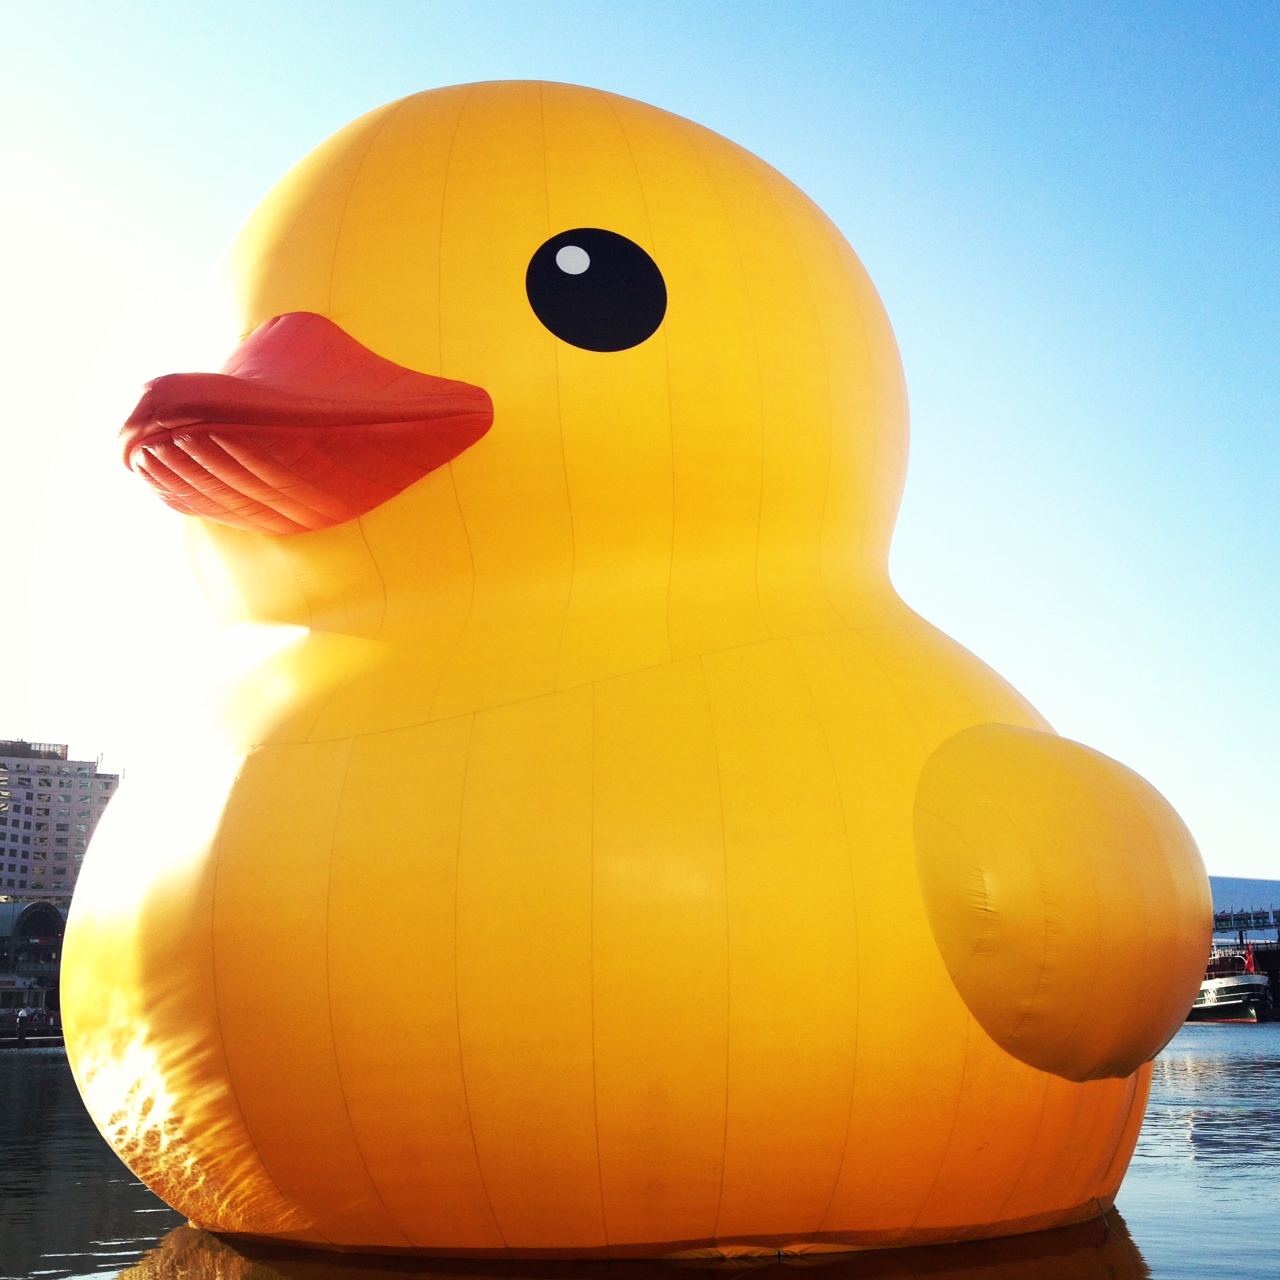 Wifes Charmed Life Giant Rubber Duck in Sydney